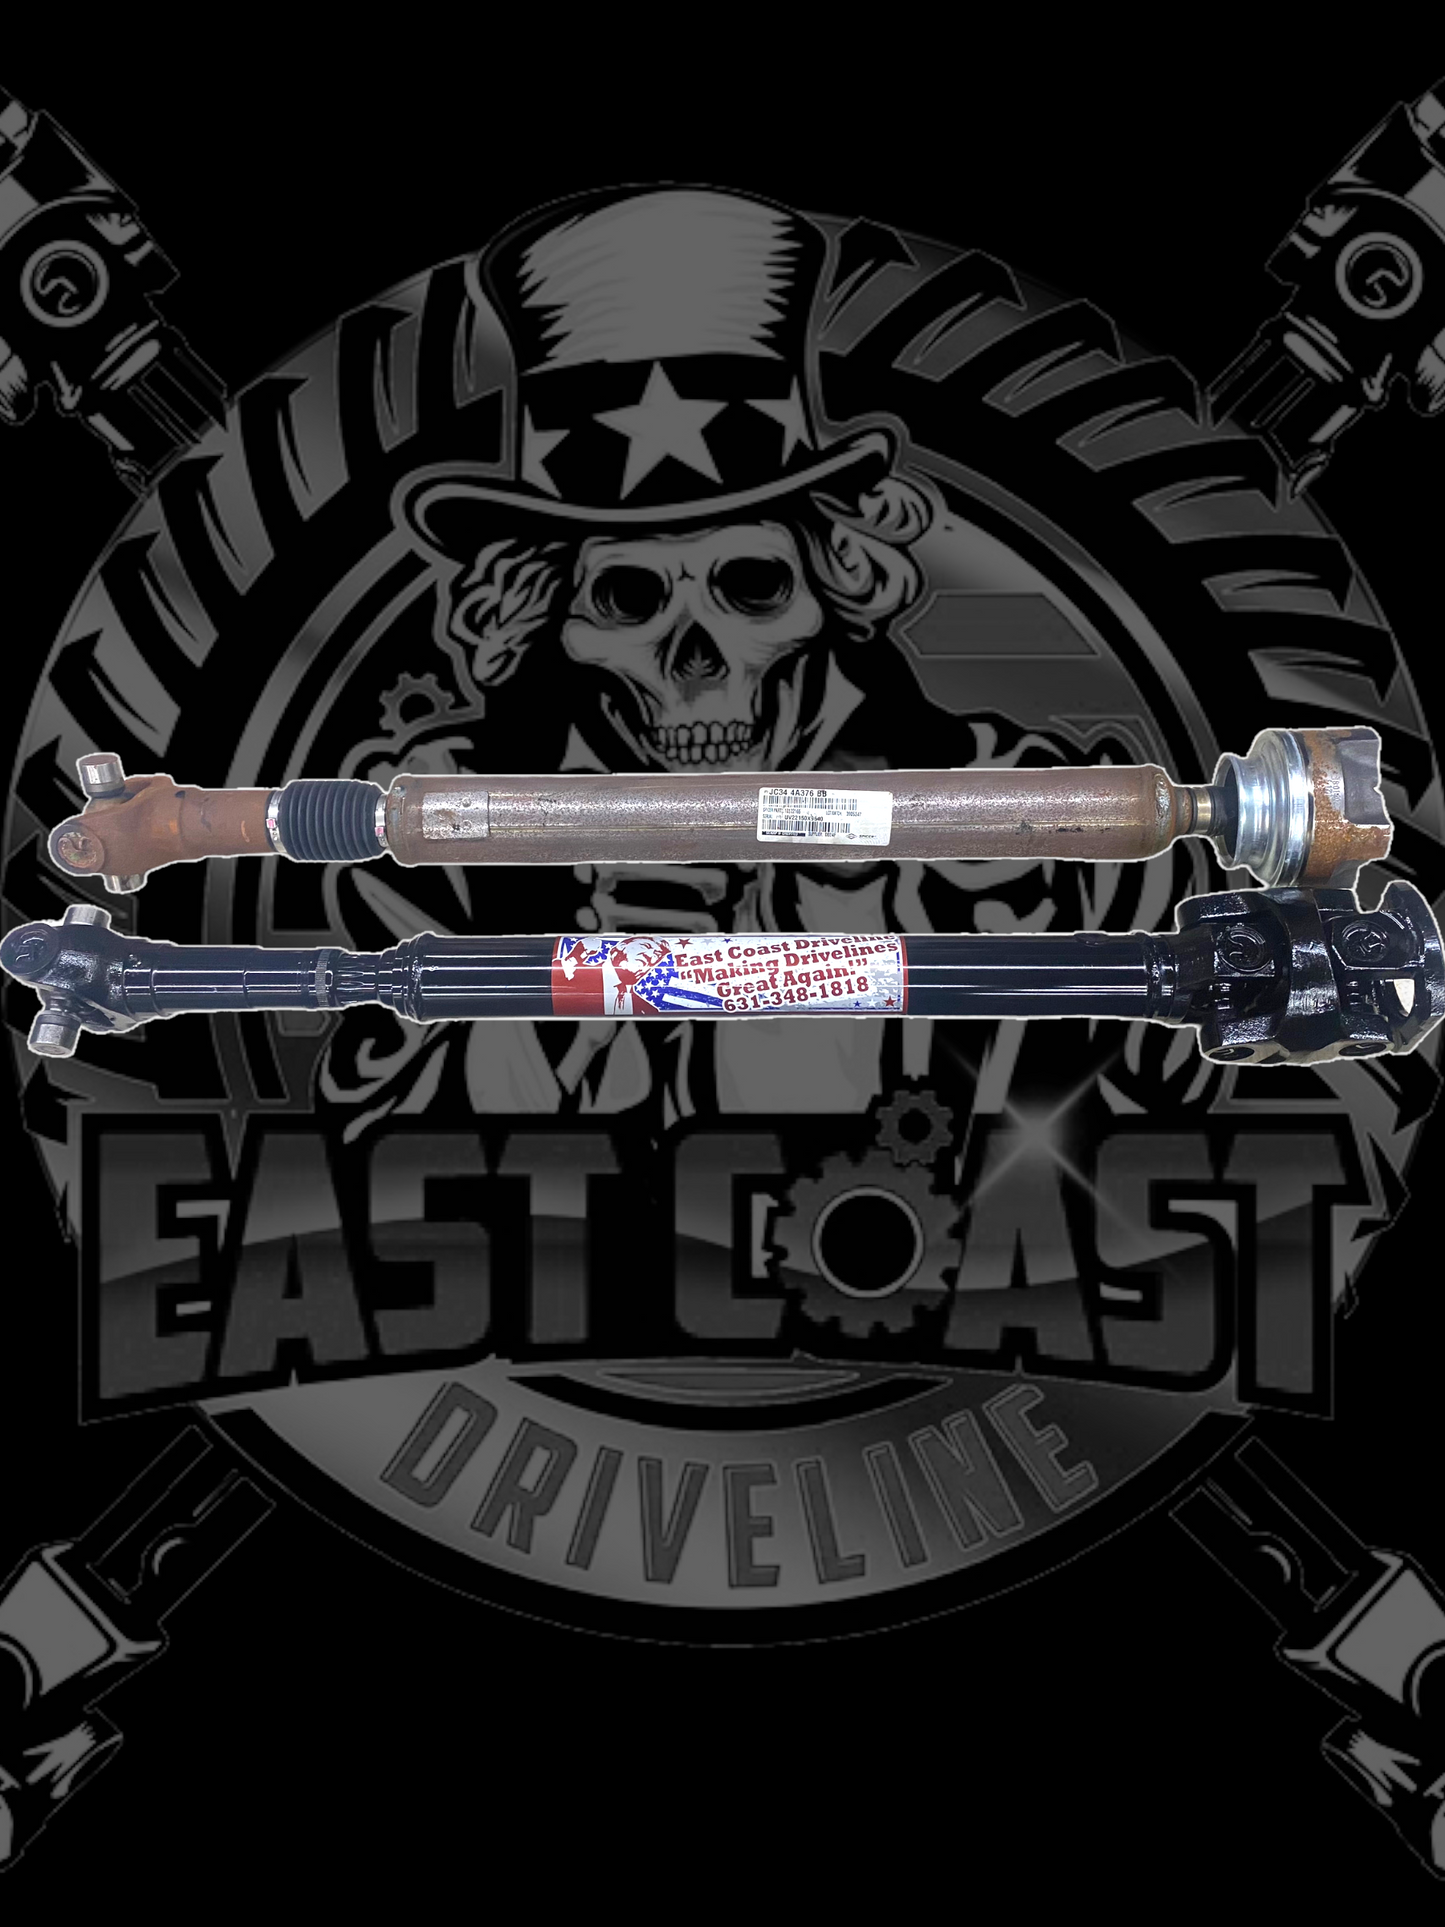 2017-2023 Ford F250, F350, F450, F550 Superduty 4WD Upgraded Front Driveshaft for 0-8” Lift (custom lengths available) HC34-4A376-AB/JC34-4A376-BB